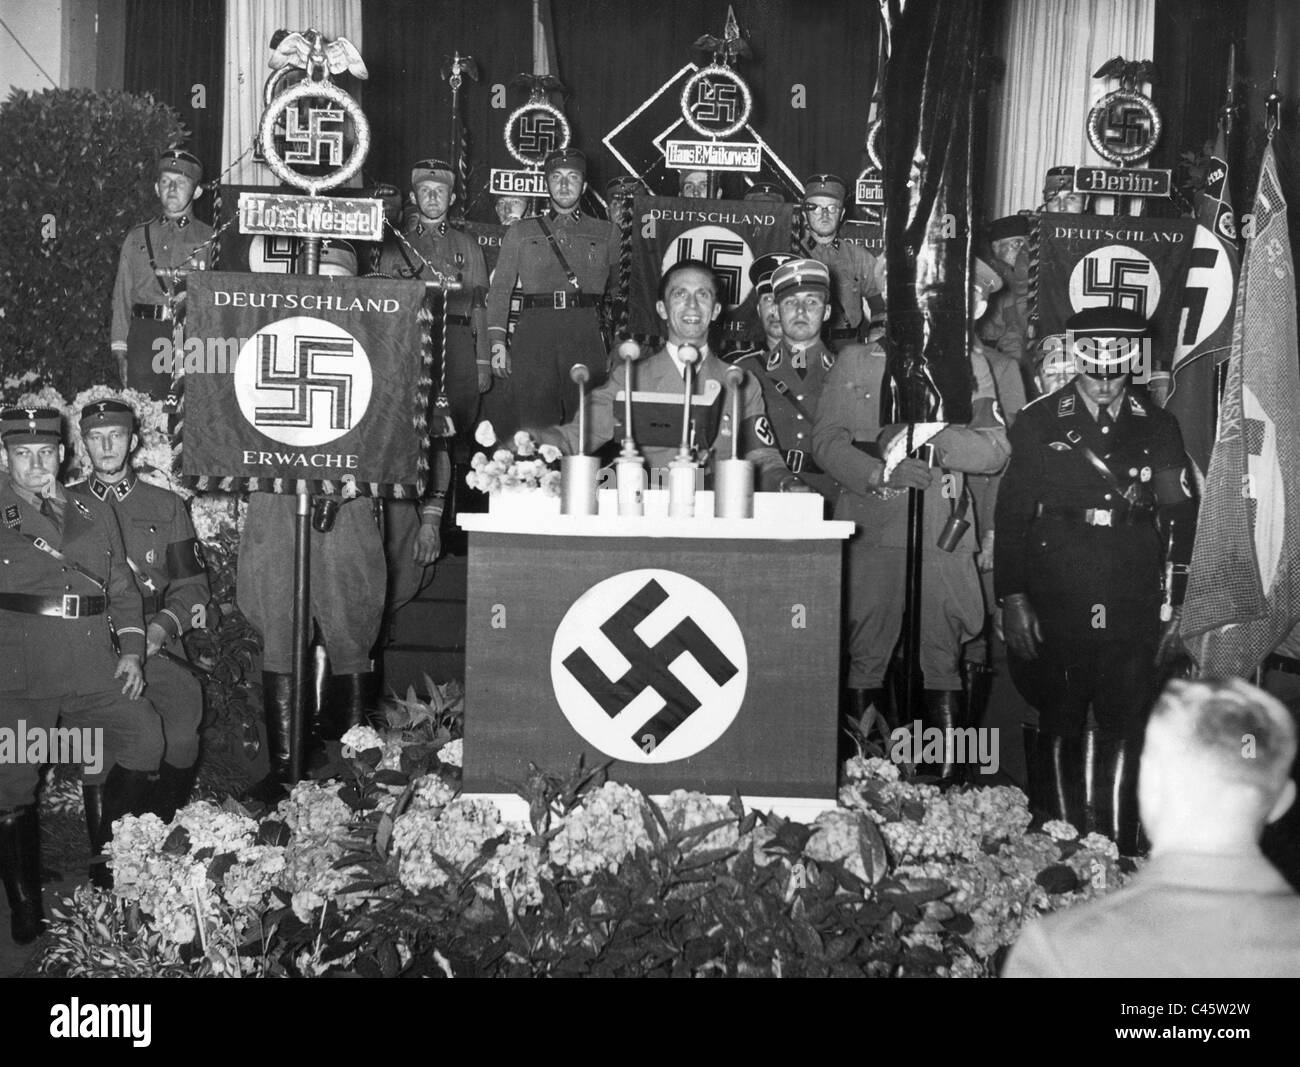 Joseph Goebbels welcomes the Old Guard, 1937 Stock Photo